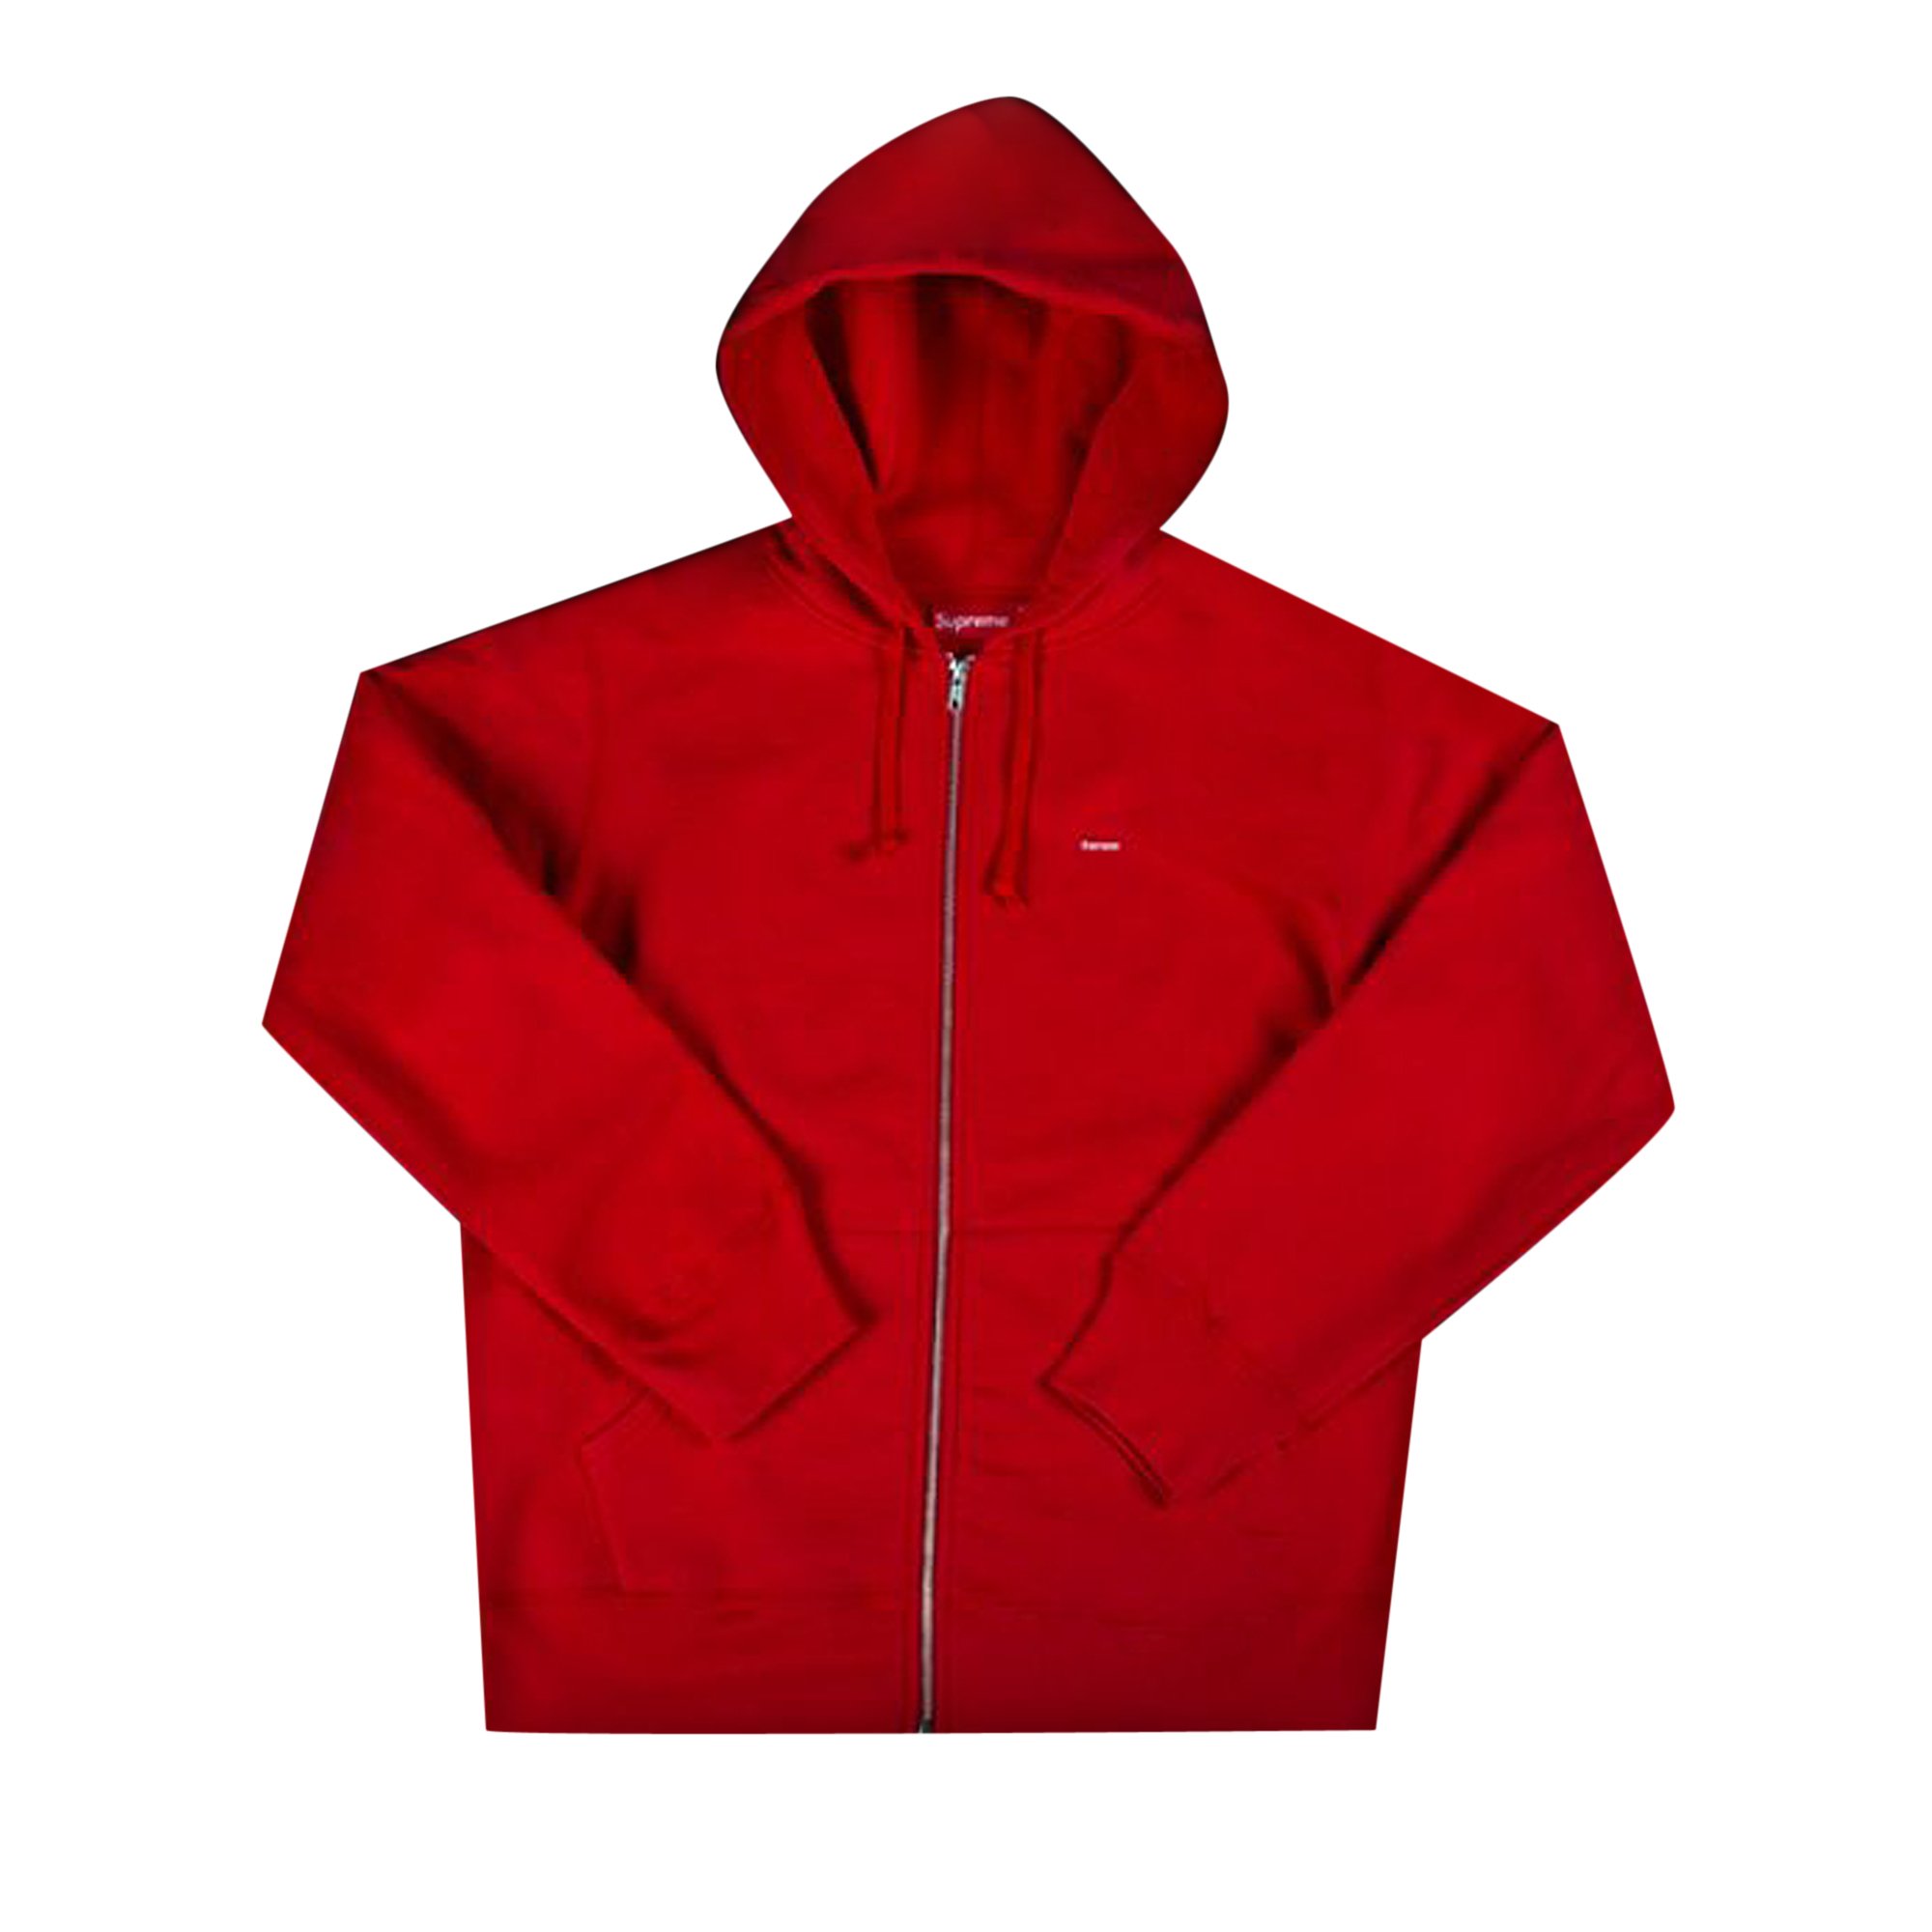 Buy Supreme Small Box Zip Up Sweatshirt 'Red' - FW17SW43 RED | GOAT